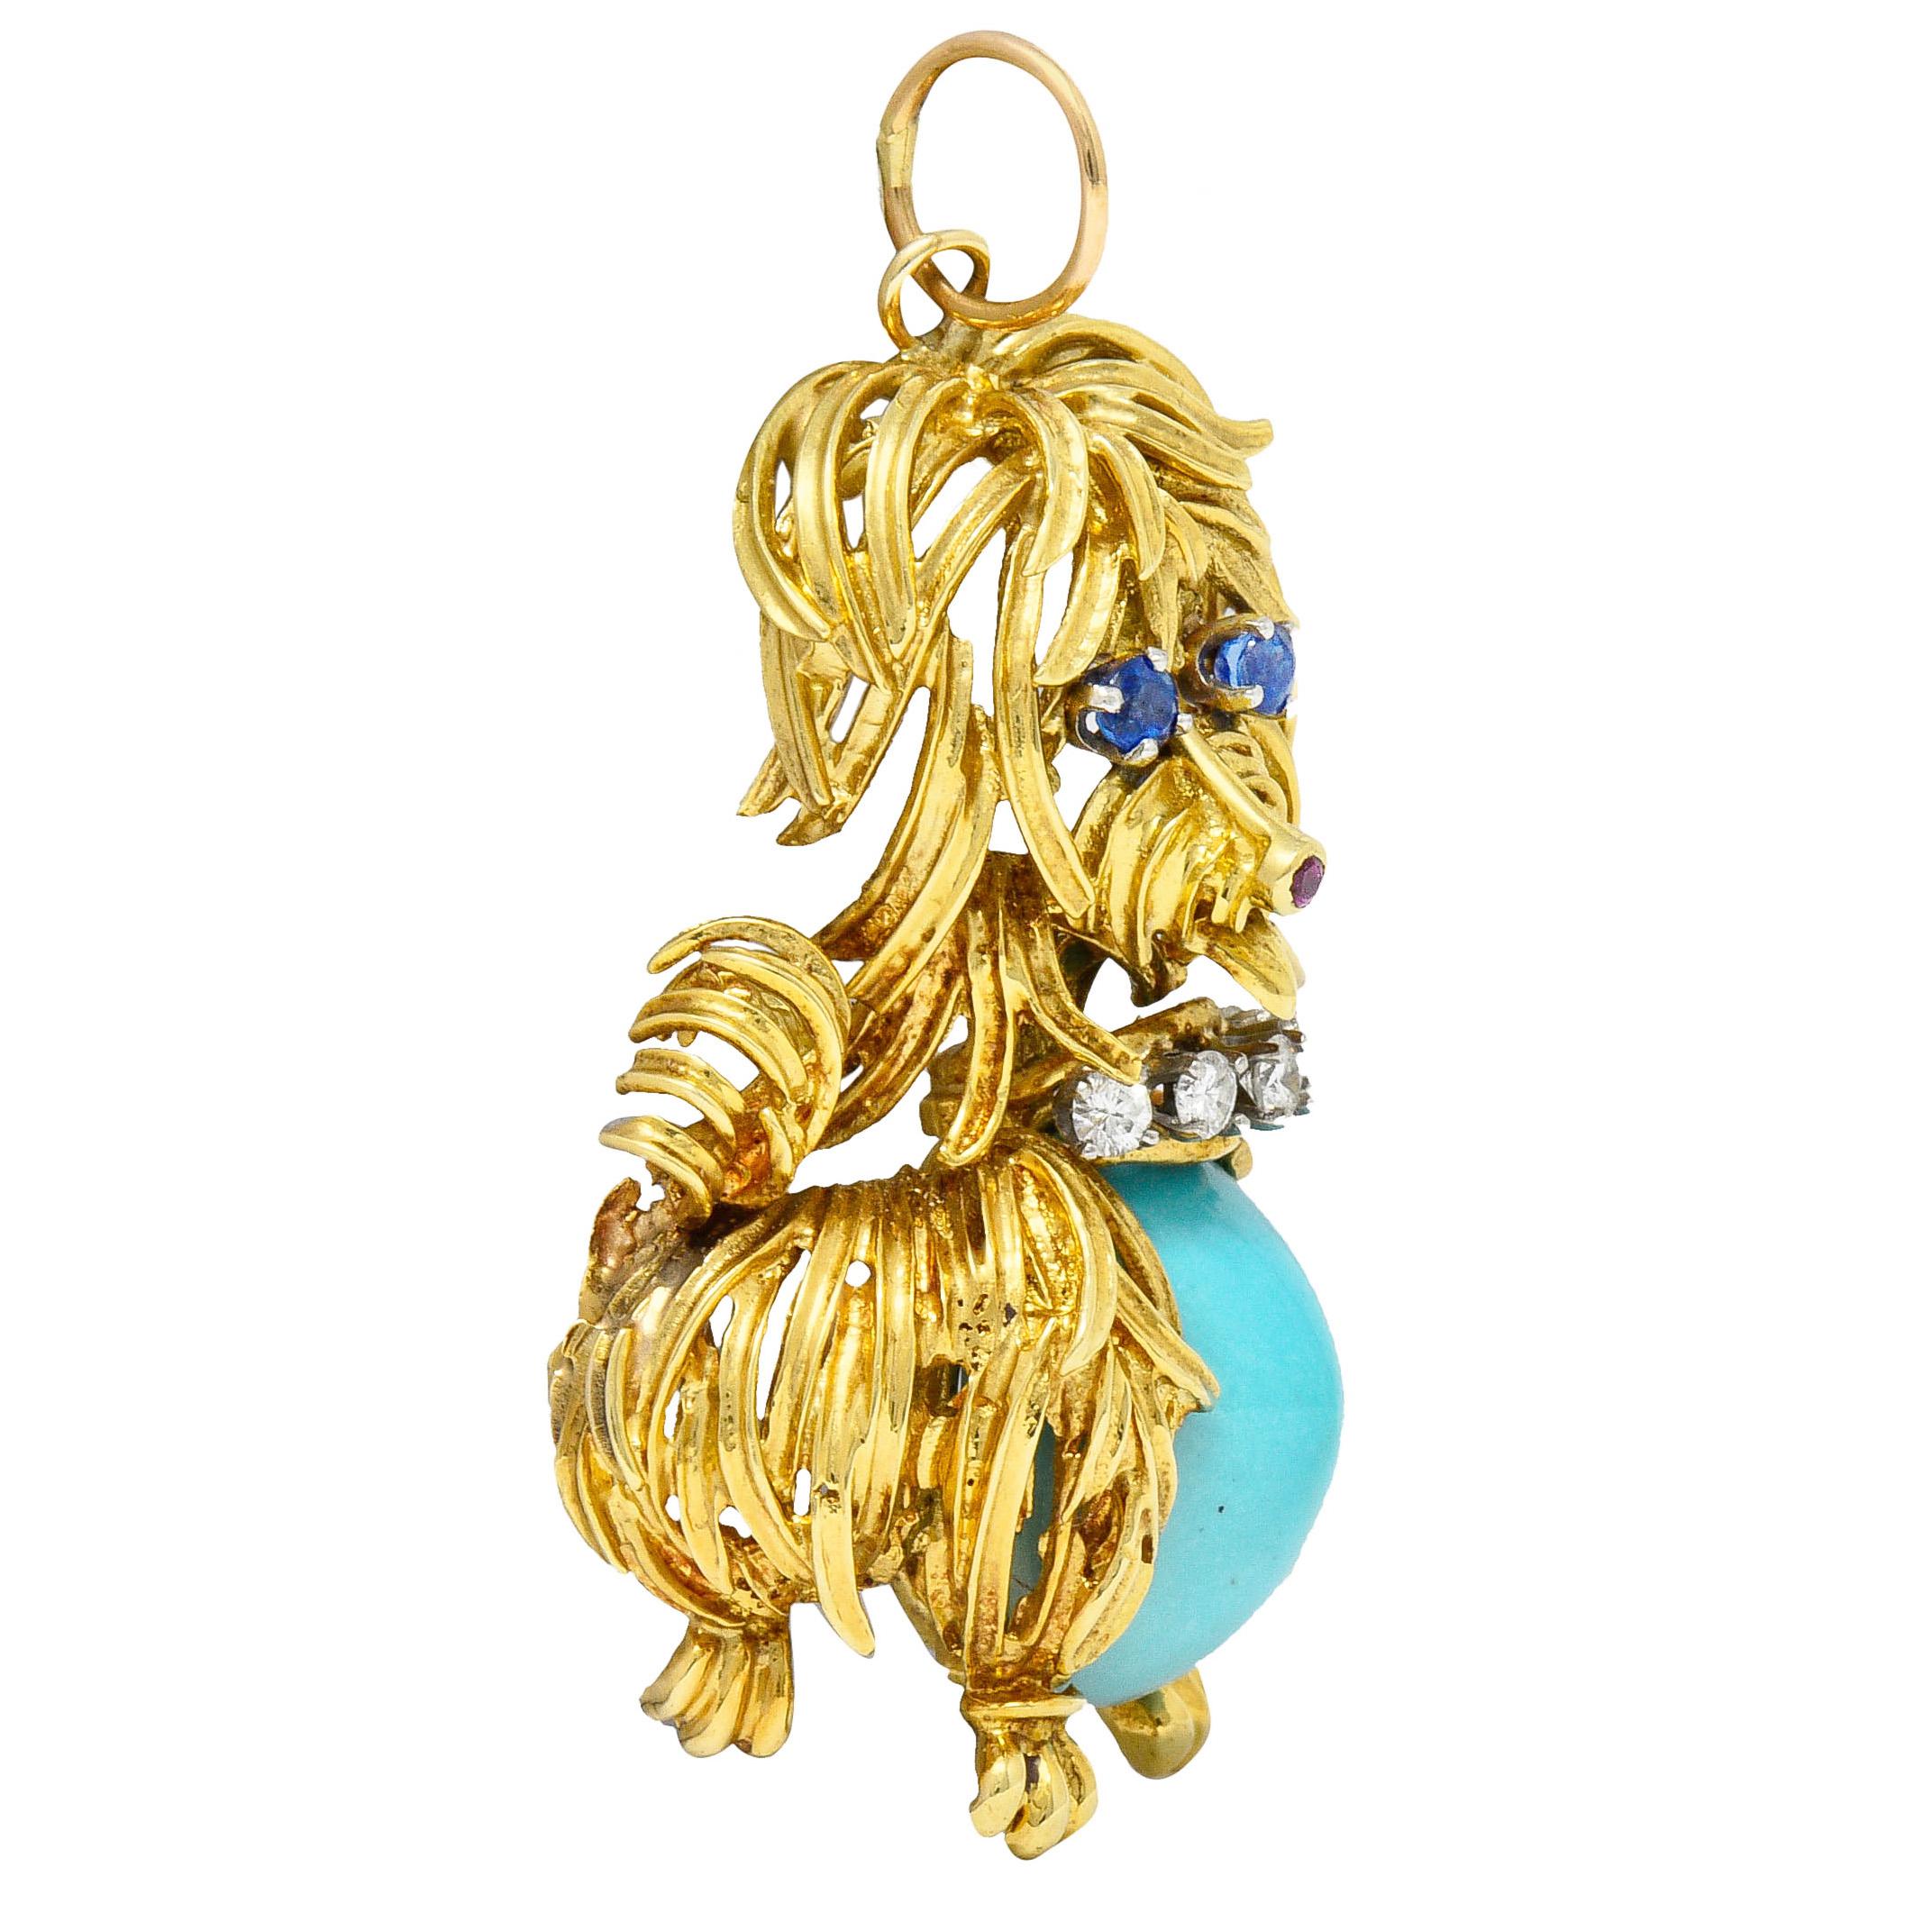 Pendant is whimsically designed as a shaggy Maltese dog with stylized gold tendrils throughout

Centering a turquoise cabochon stomach measuring approximately 14.0 x 12.0 mm

Highly domed, opaque, and robin's egg blue in color with minimal front